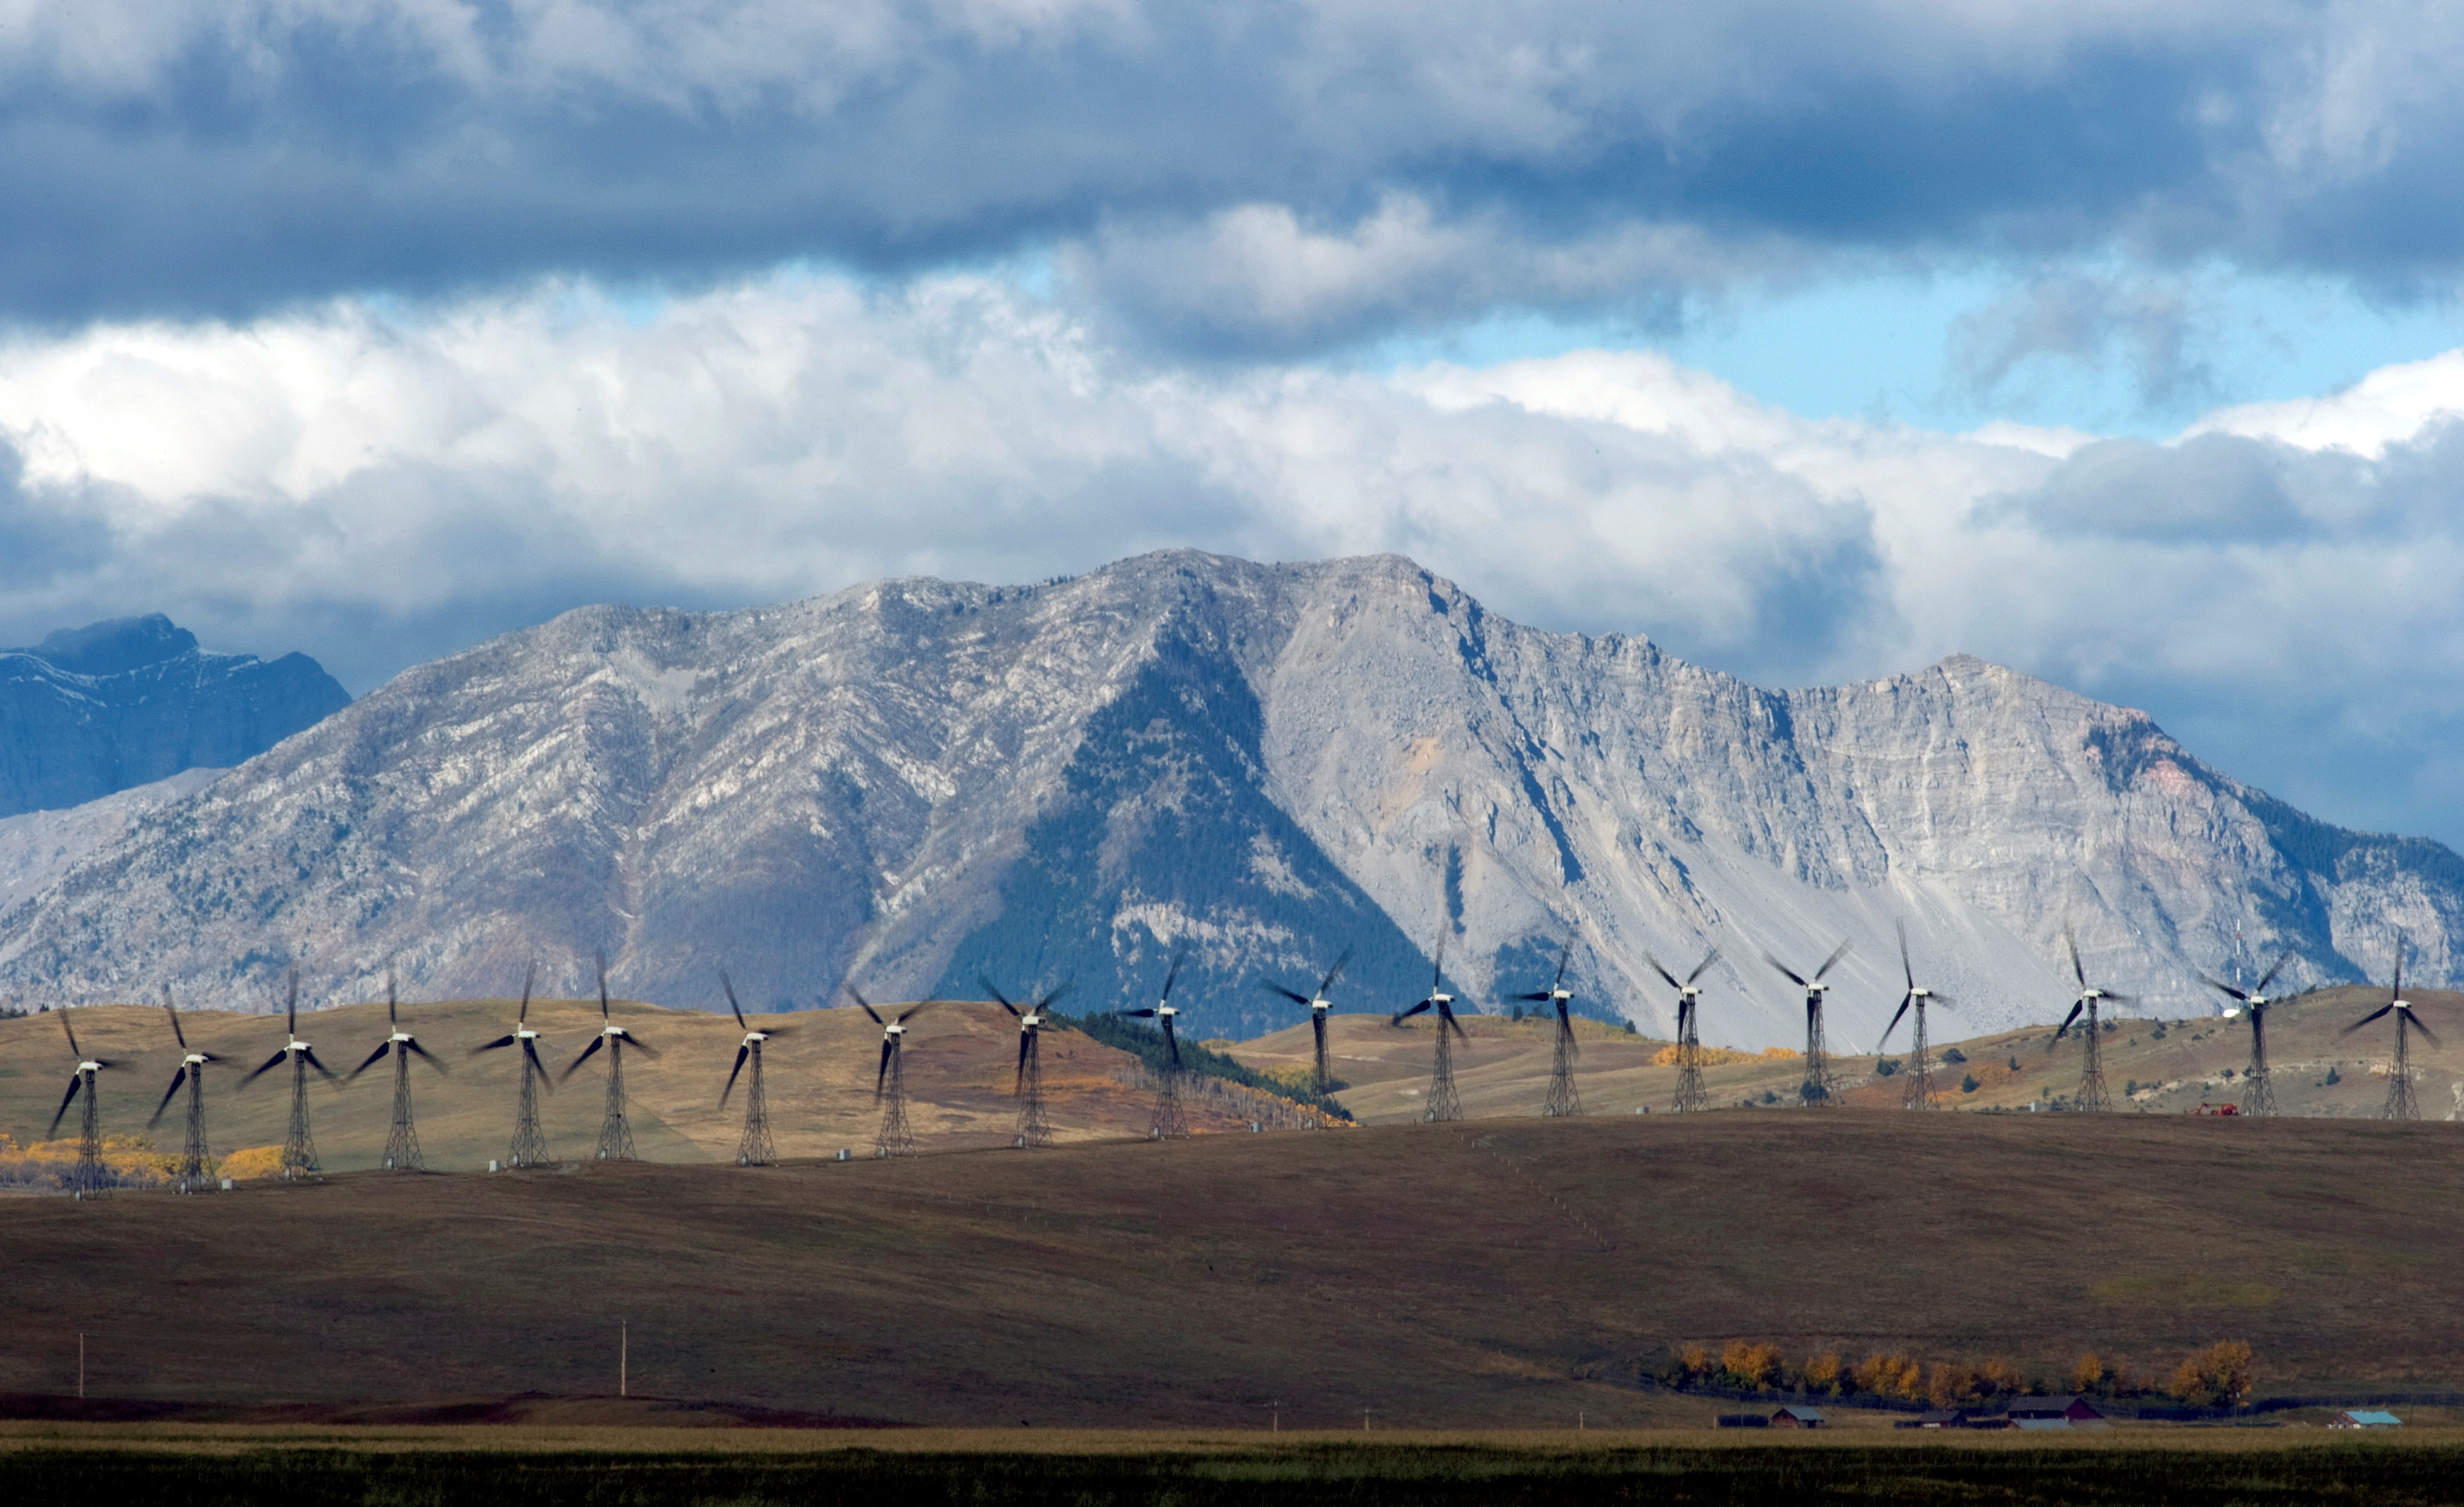 Windmills generate electricity in the windy rolling foothills of the Rocky Mountains near the town of Pincher Creek